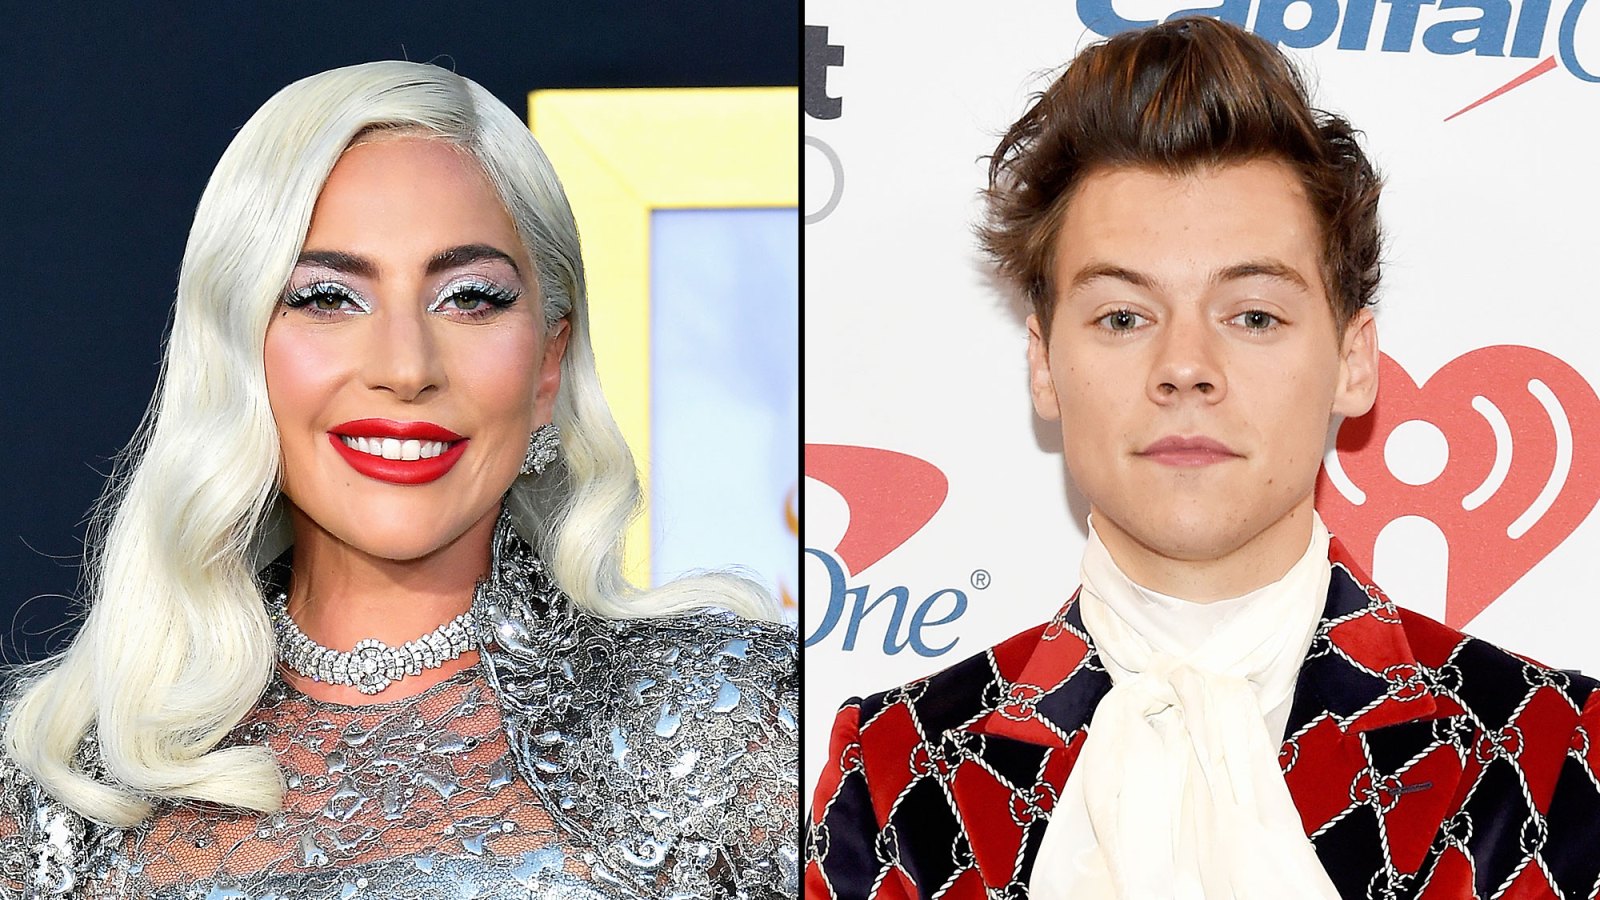 Lady Gaga Harry Styles Everything You Need to Know About Met Gala 2019